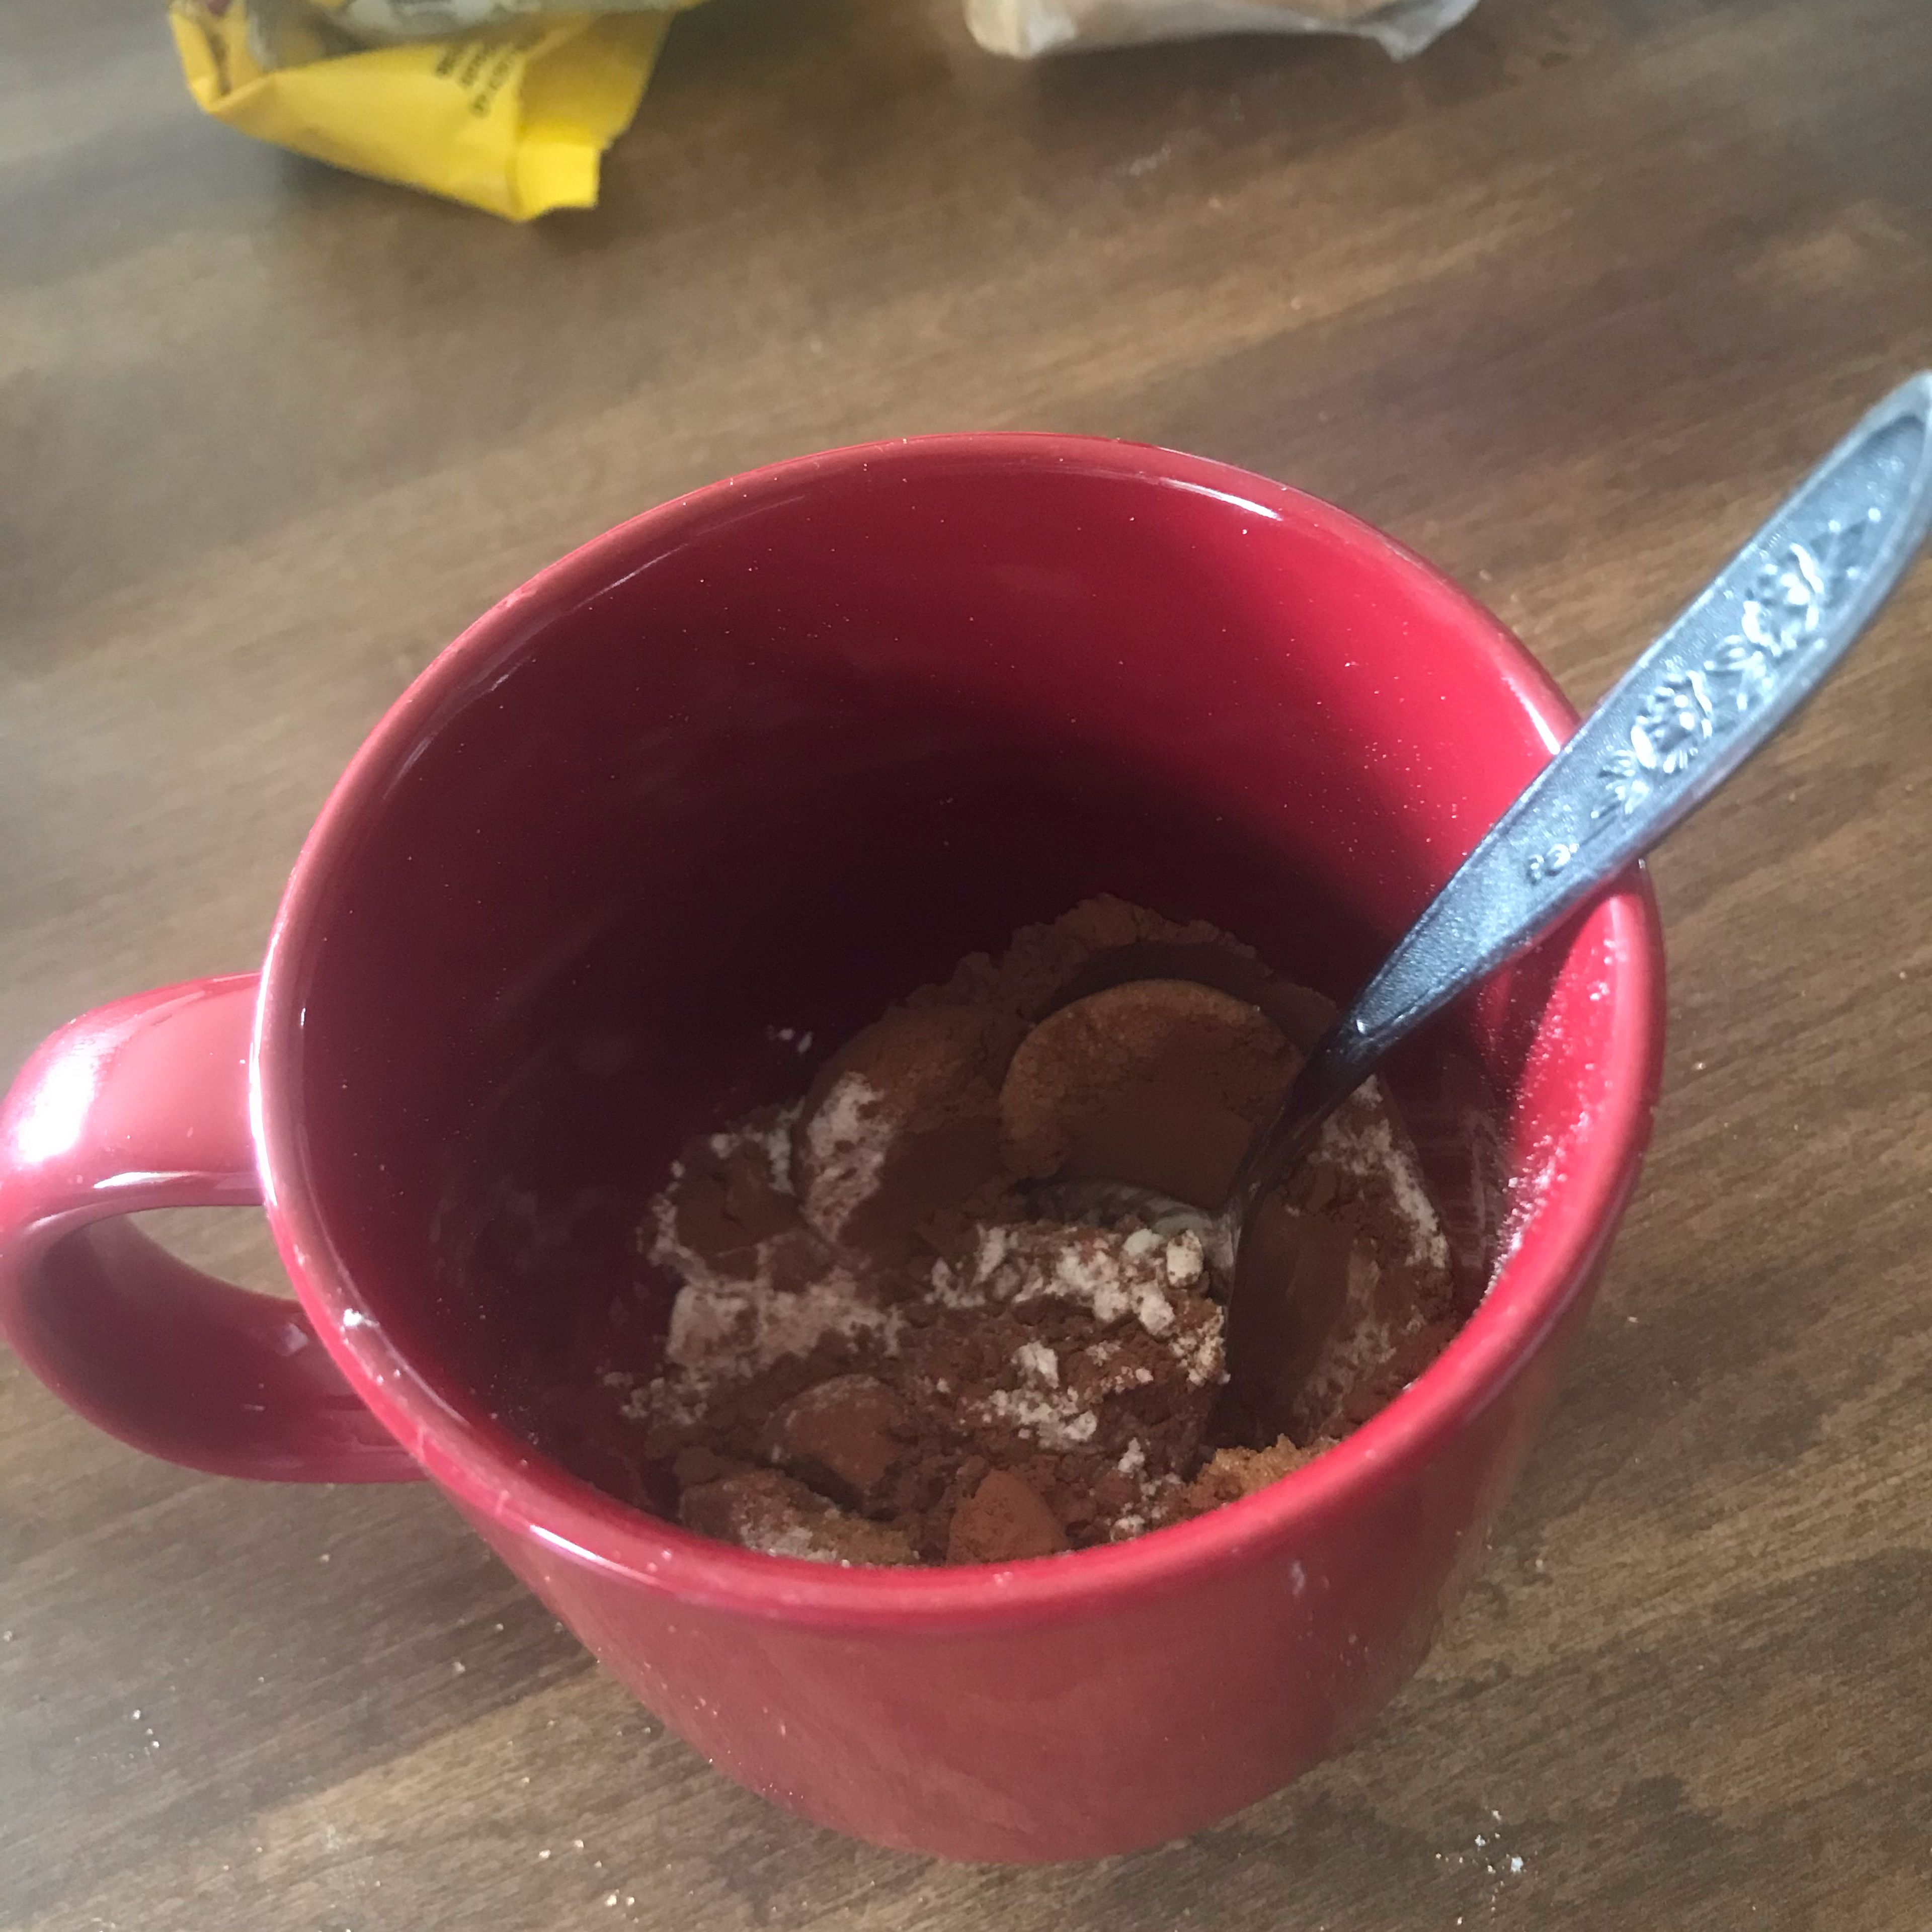 Mix the flour, brown sugar, cocoa powder,and salt together in a microwaveable mug